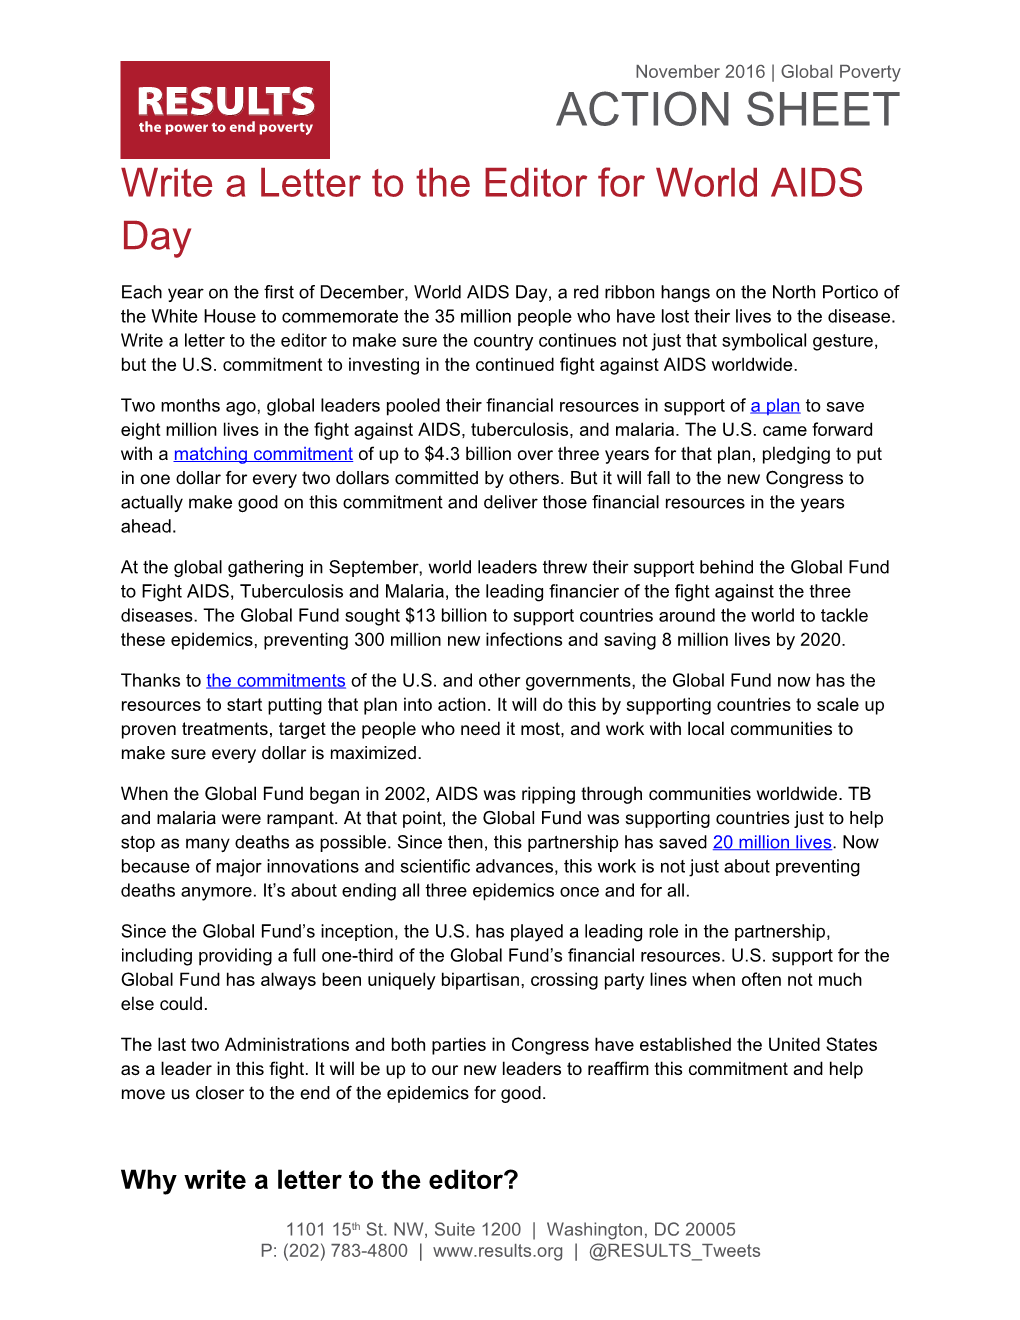 Write a Letter to the Editor for World AIDS Day